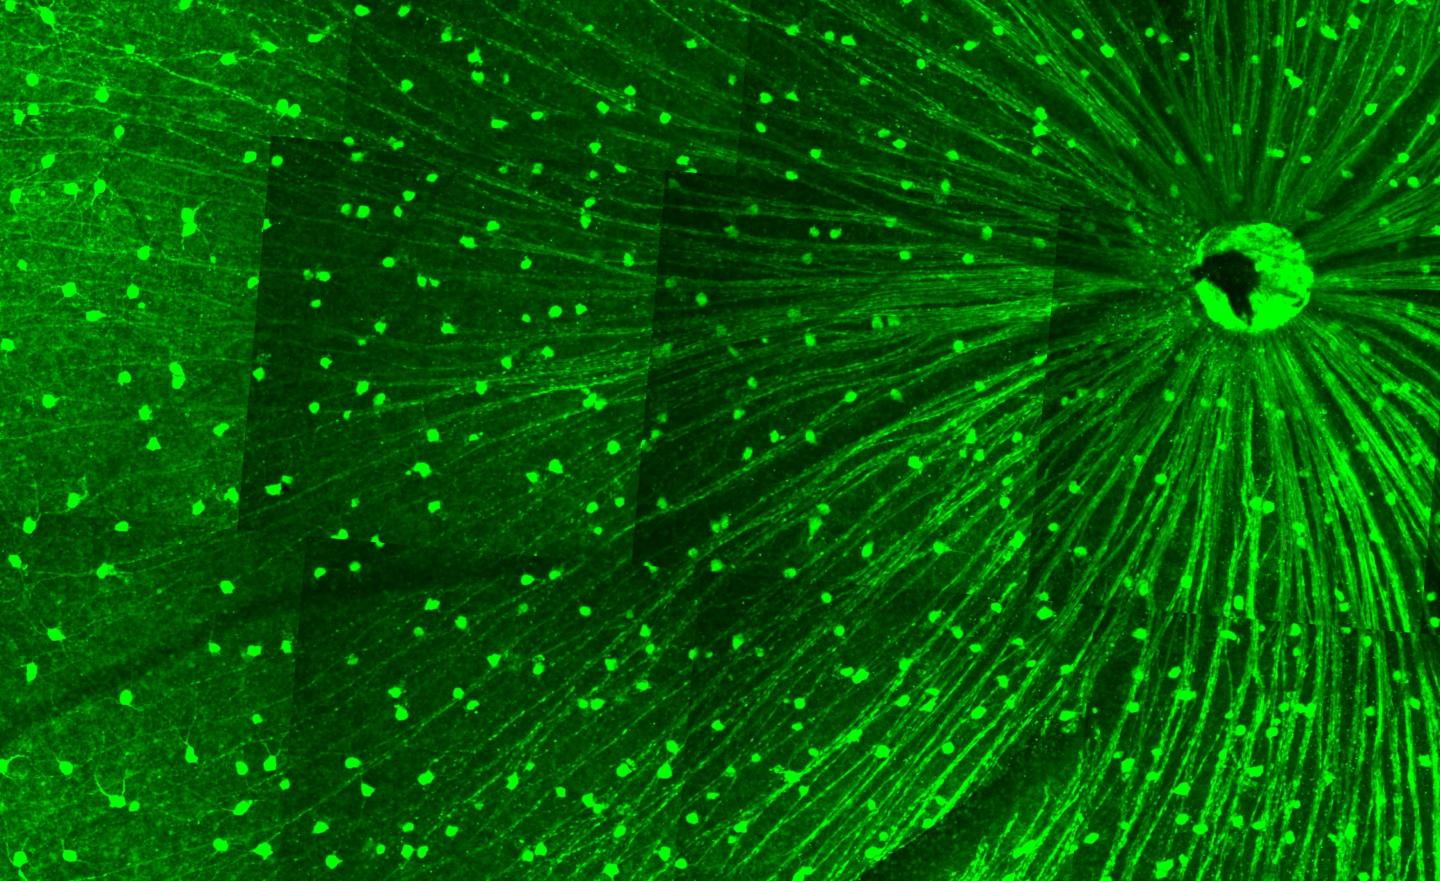 Alpha-Type Retinal Ganglion Cells in Part of an Intact Mouse Retina